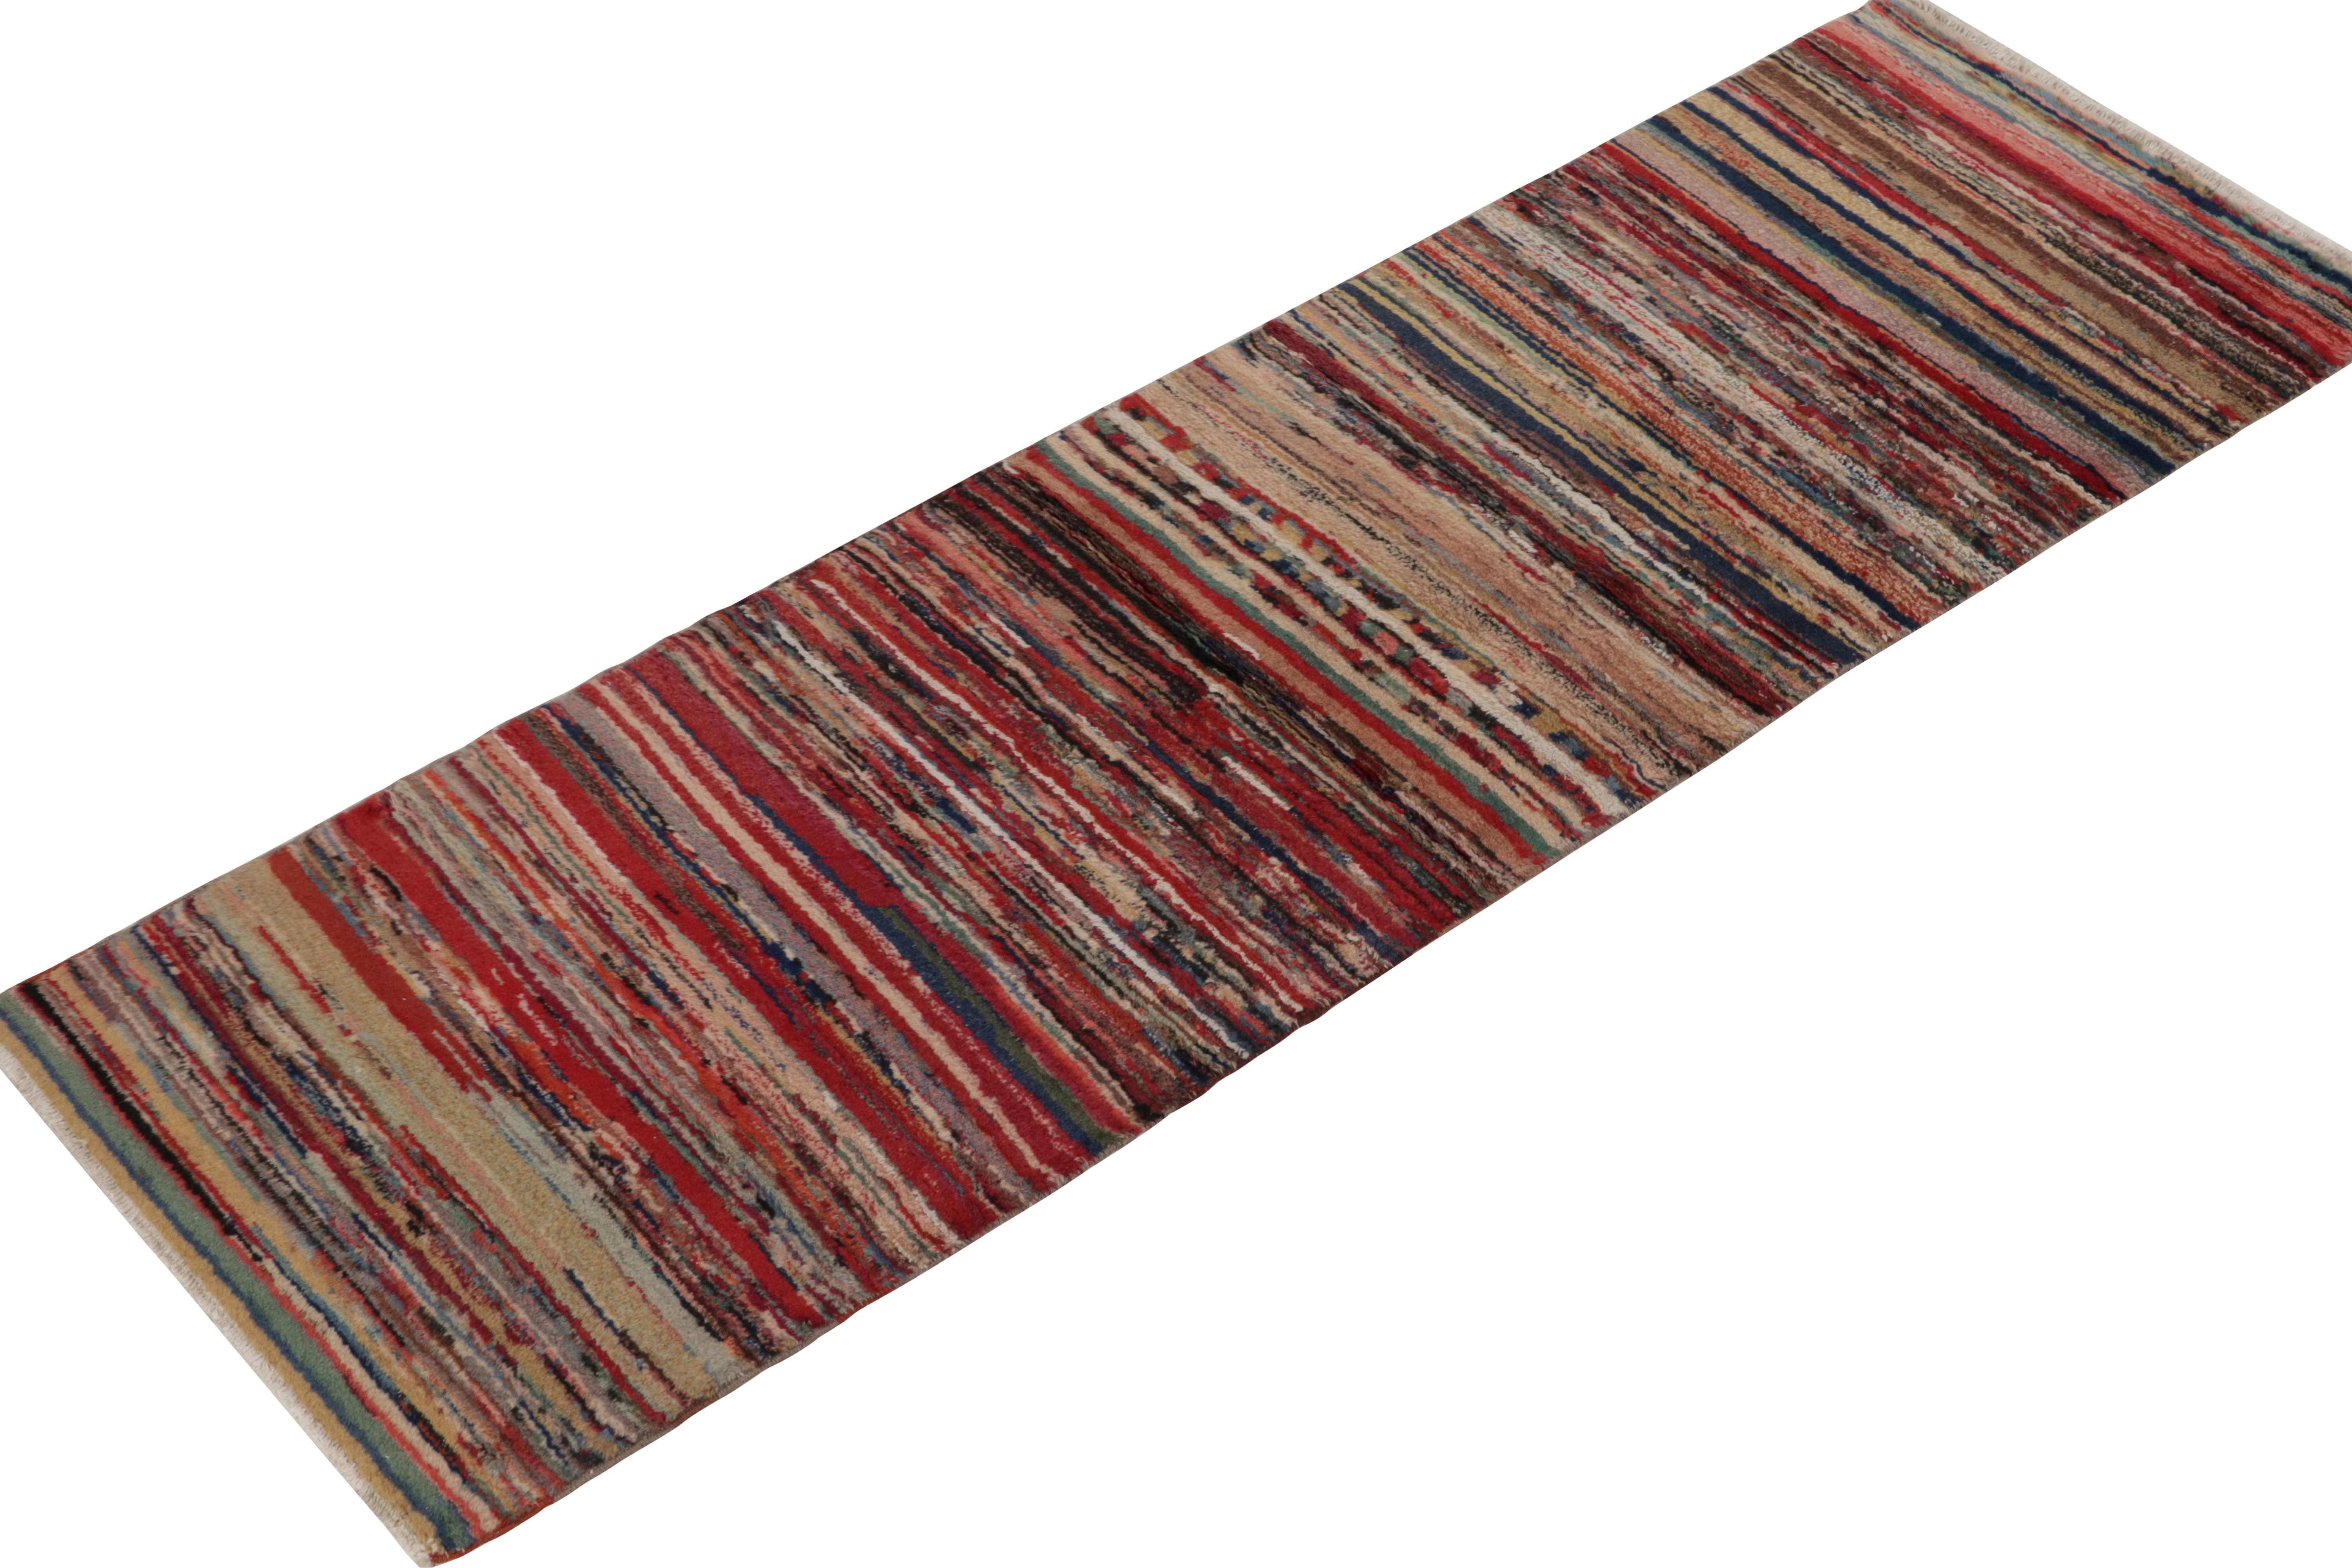 A vintage 3x8 mid-century runner from the Mid-Century Pasha Collection by Rug & Kilim — celebrating the rare works believed to hail from multi-disciplinary Turkish icon, Zeki Müren. 

On the Design: Hand knotted in wool, the striped pattern sits